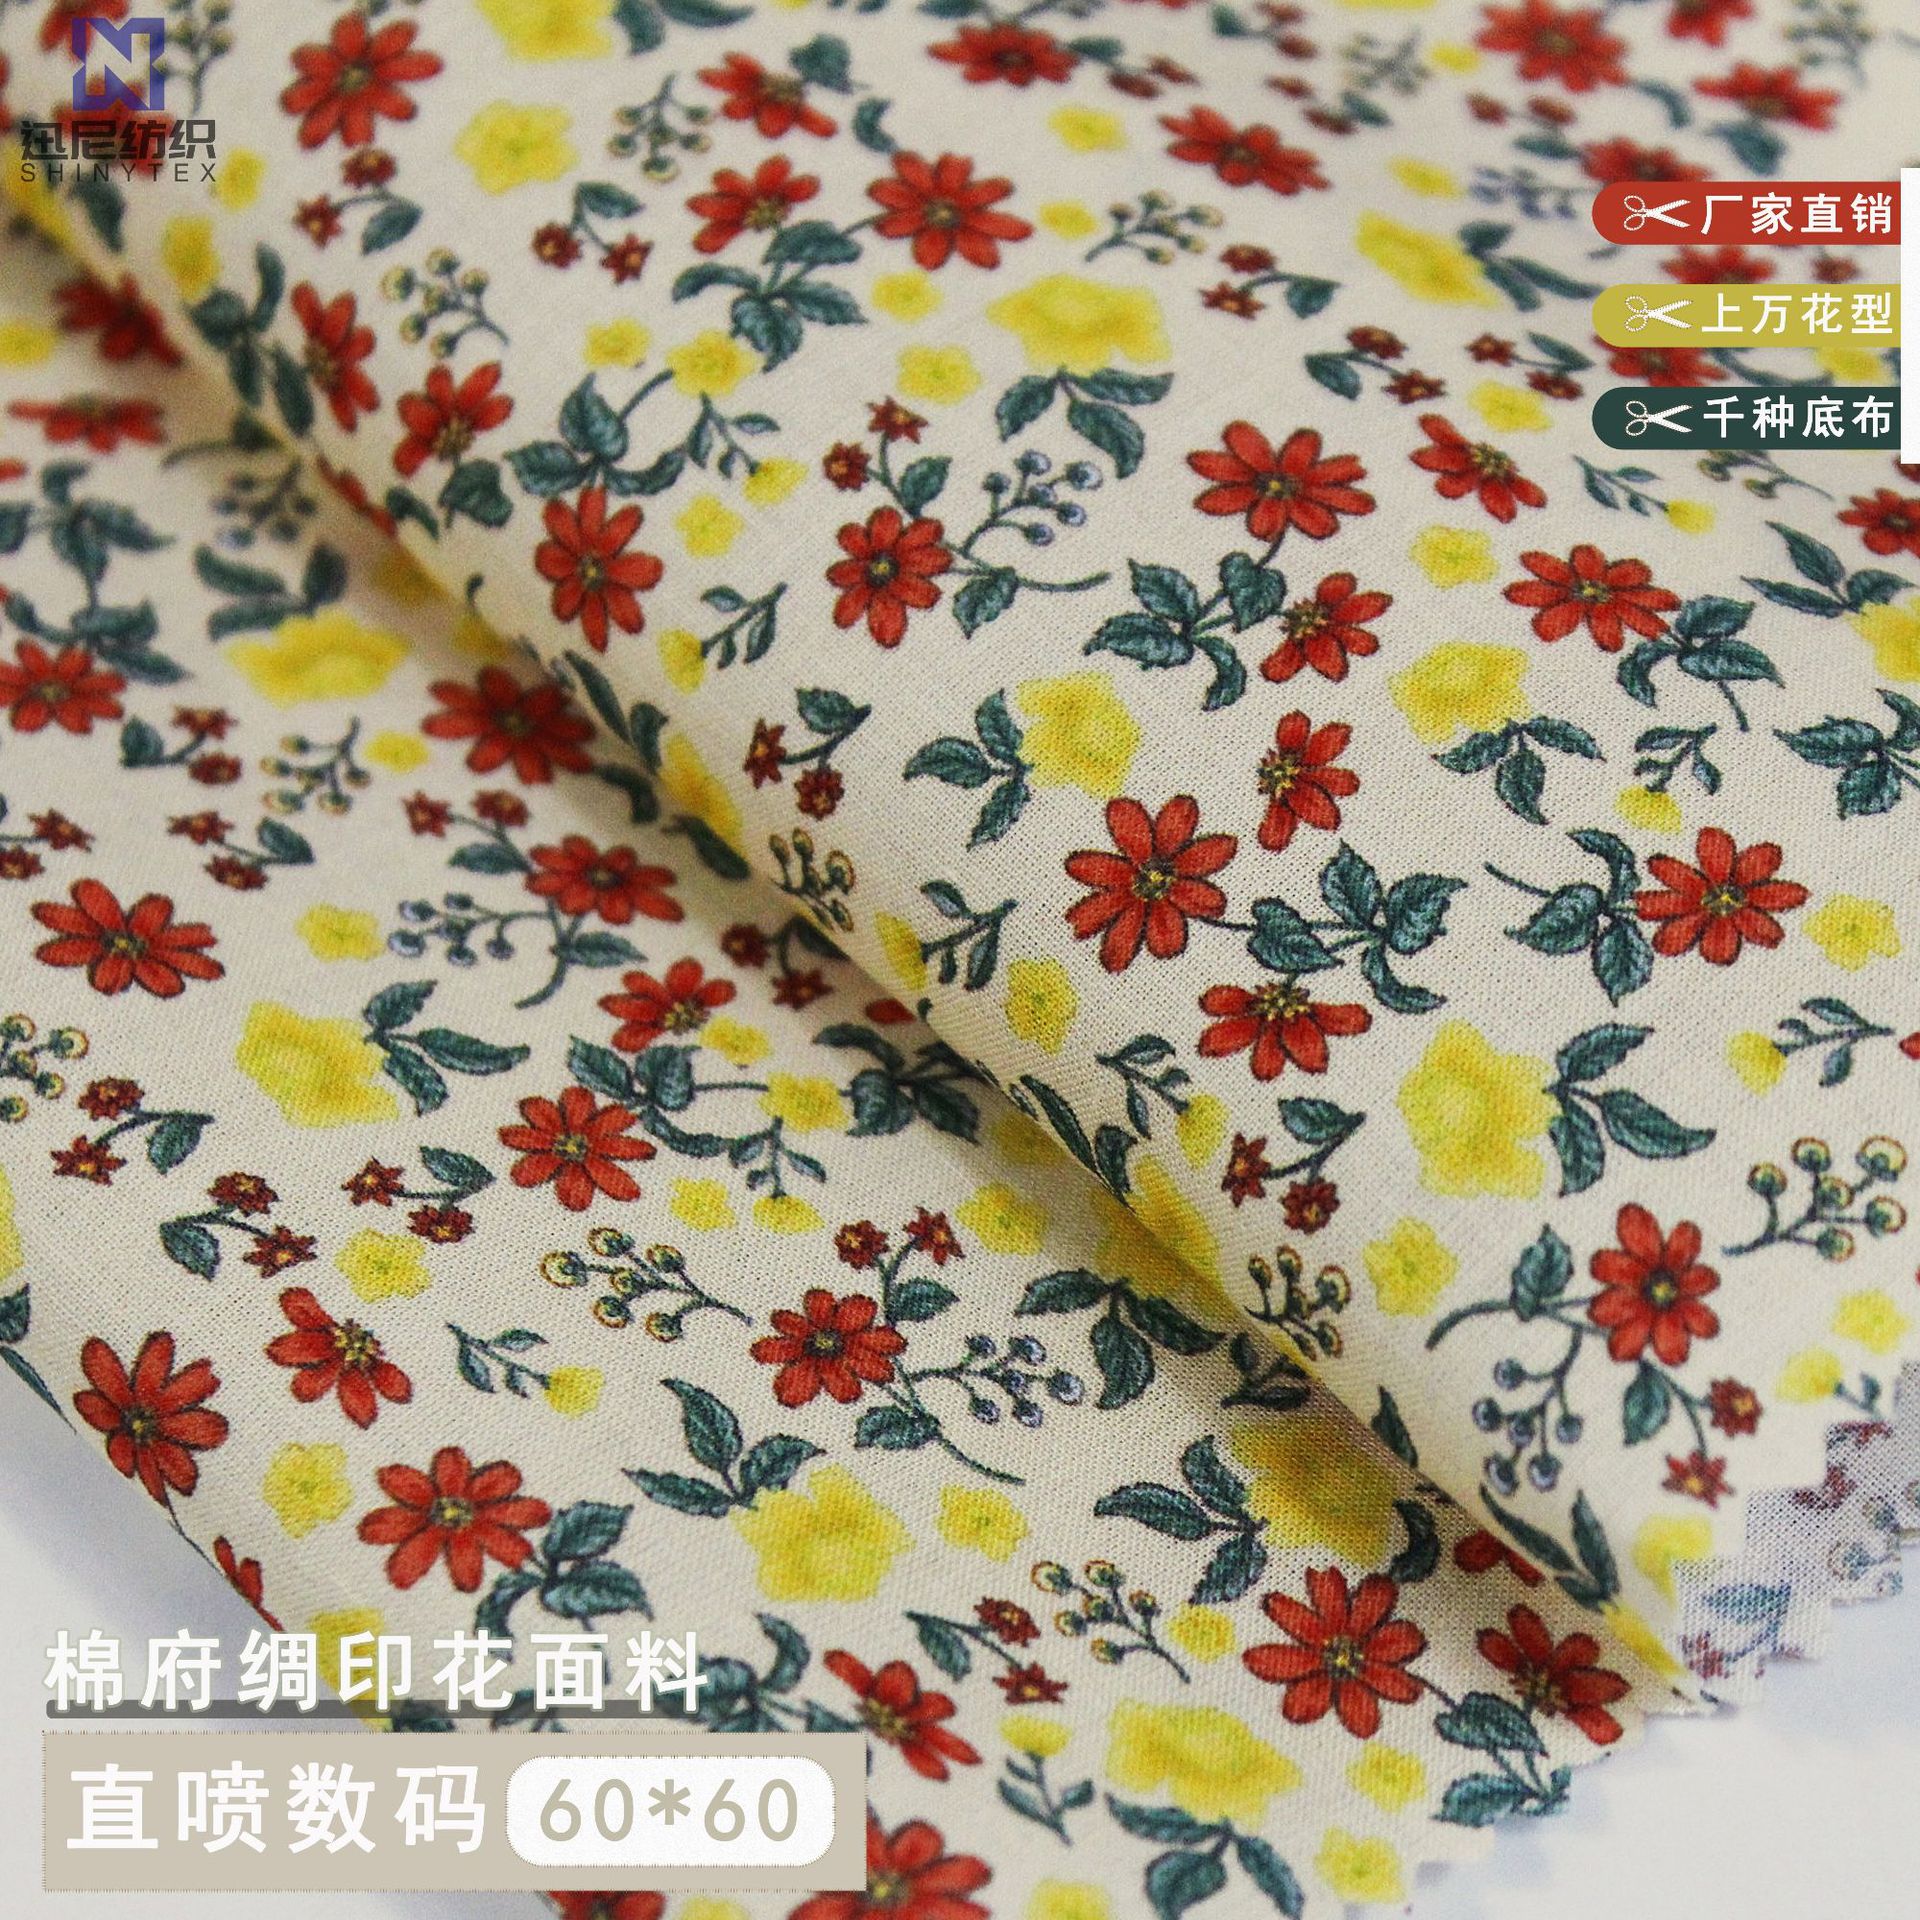 [Direct injection digital]Women's wear shirt Dress Fabric Spring and summer Voile Broken flowers Calico